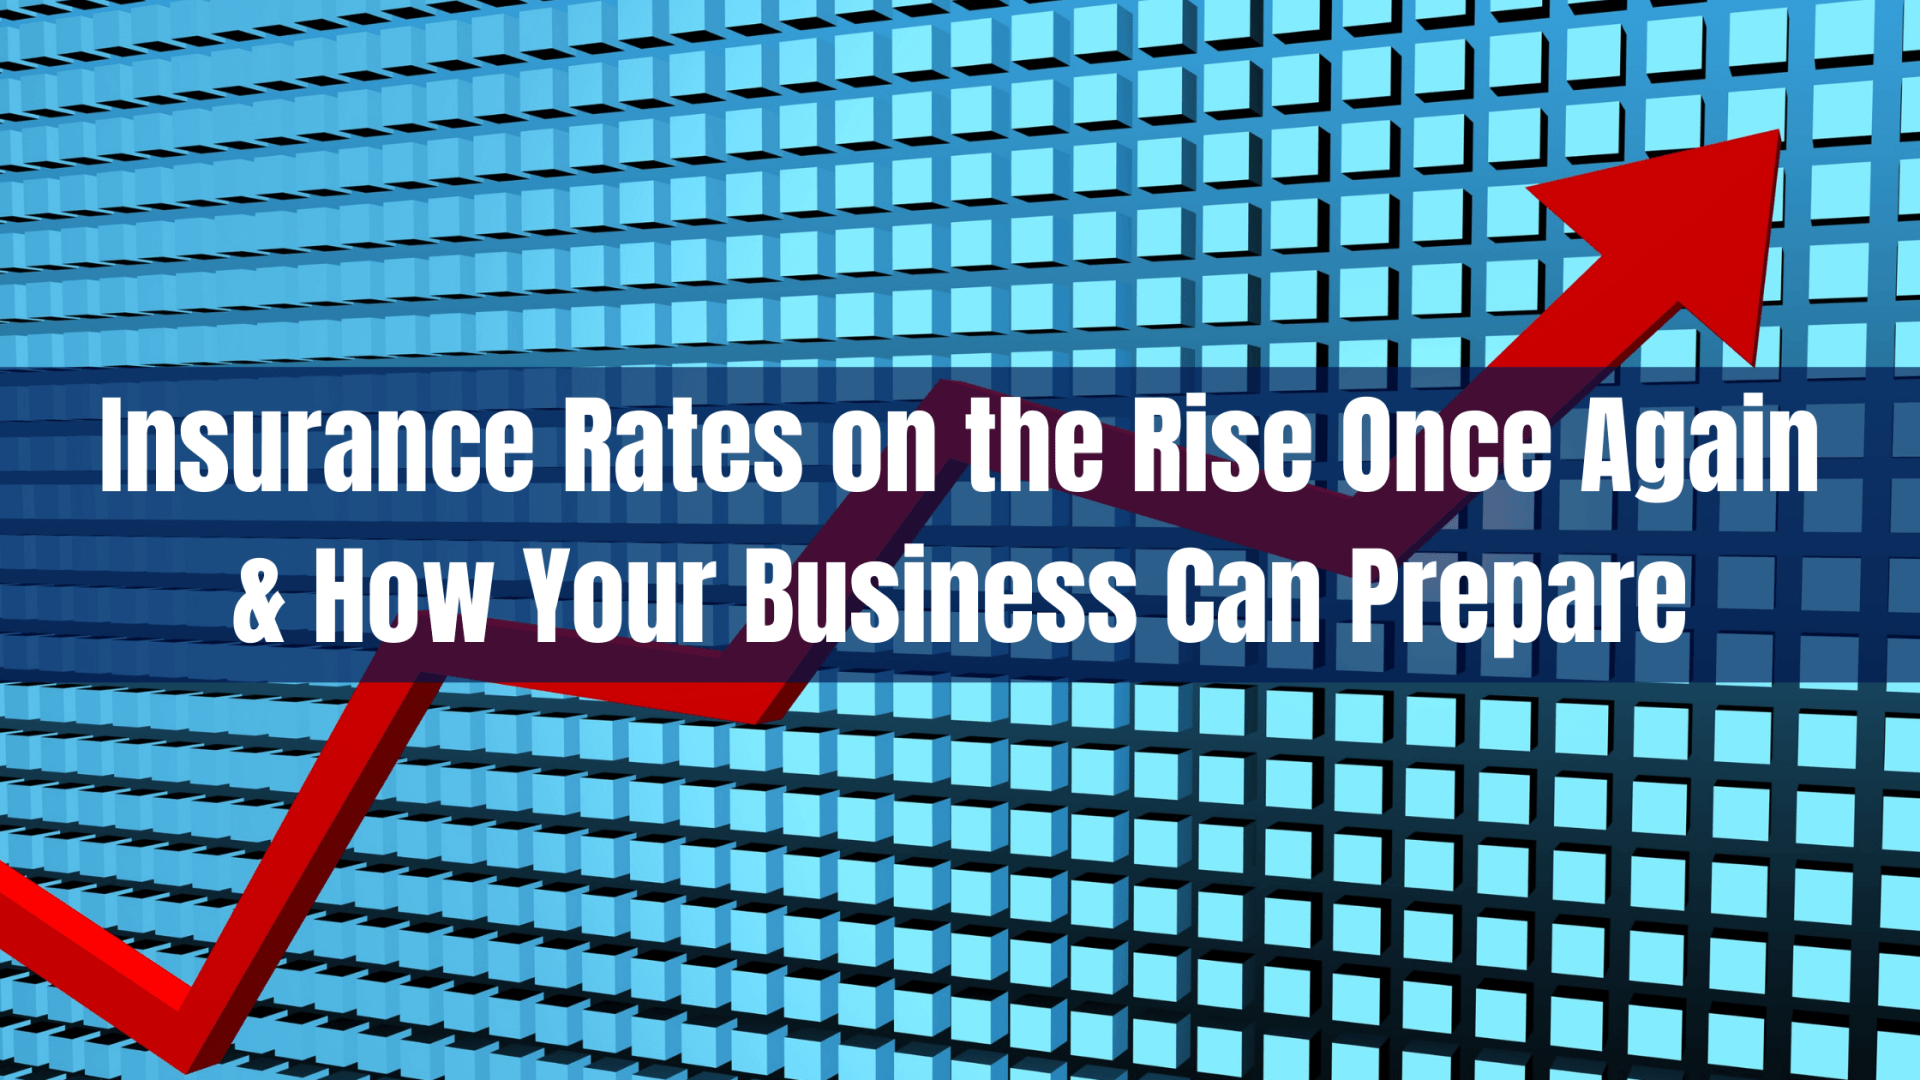 Insurance Rates on the Rise Once Again & How Your Business Can Prepare